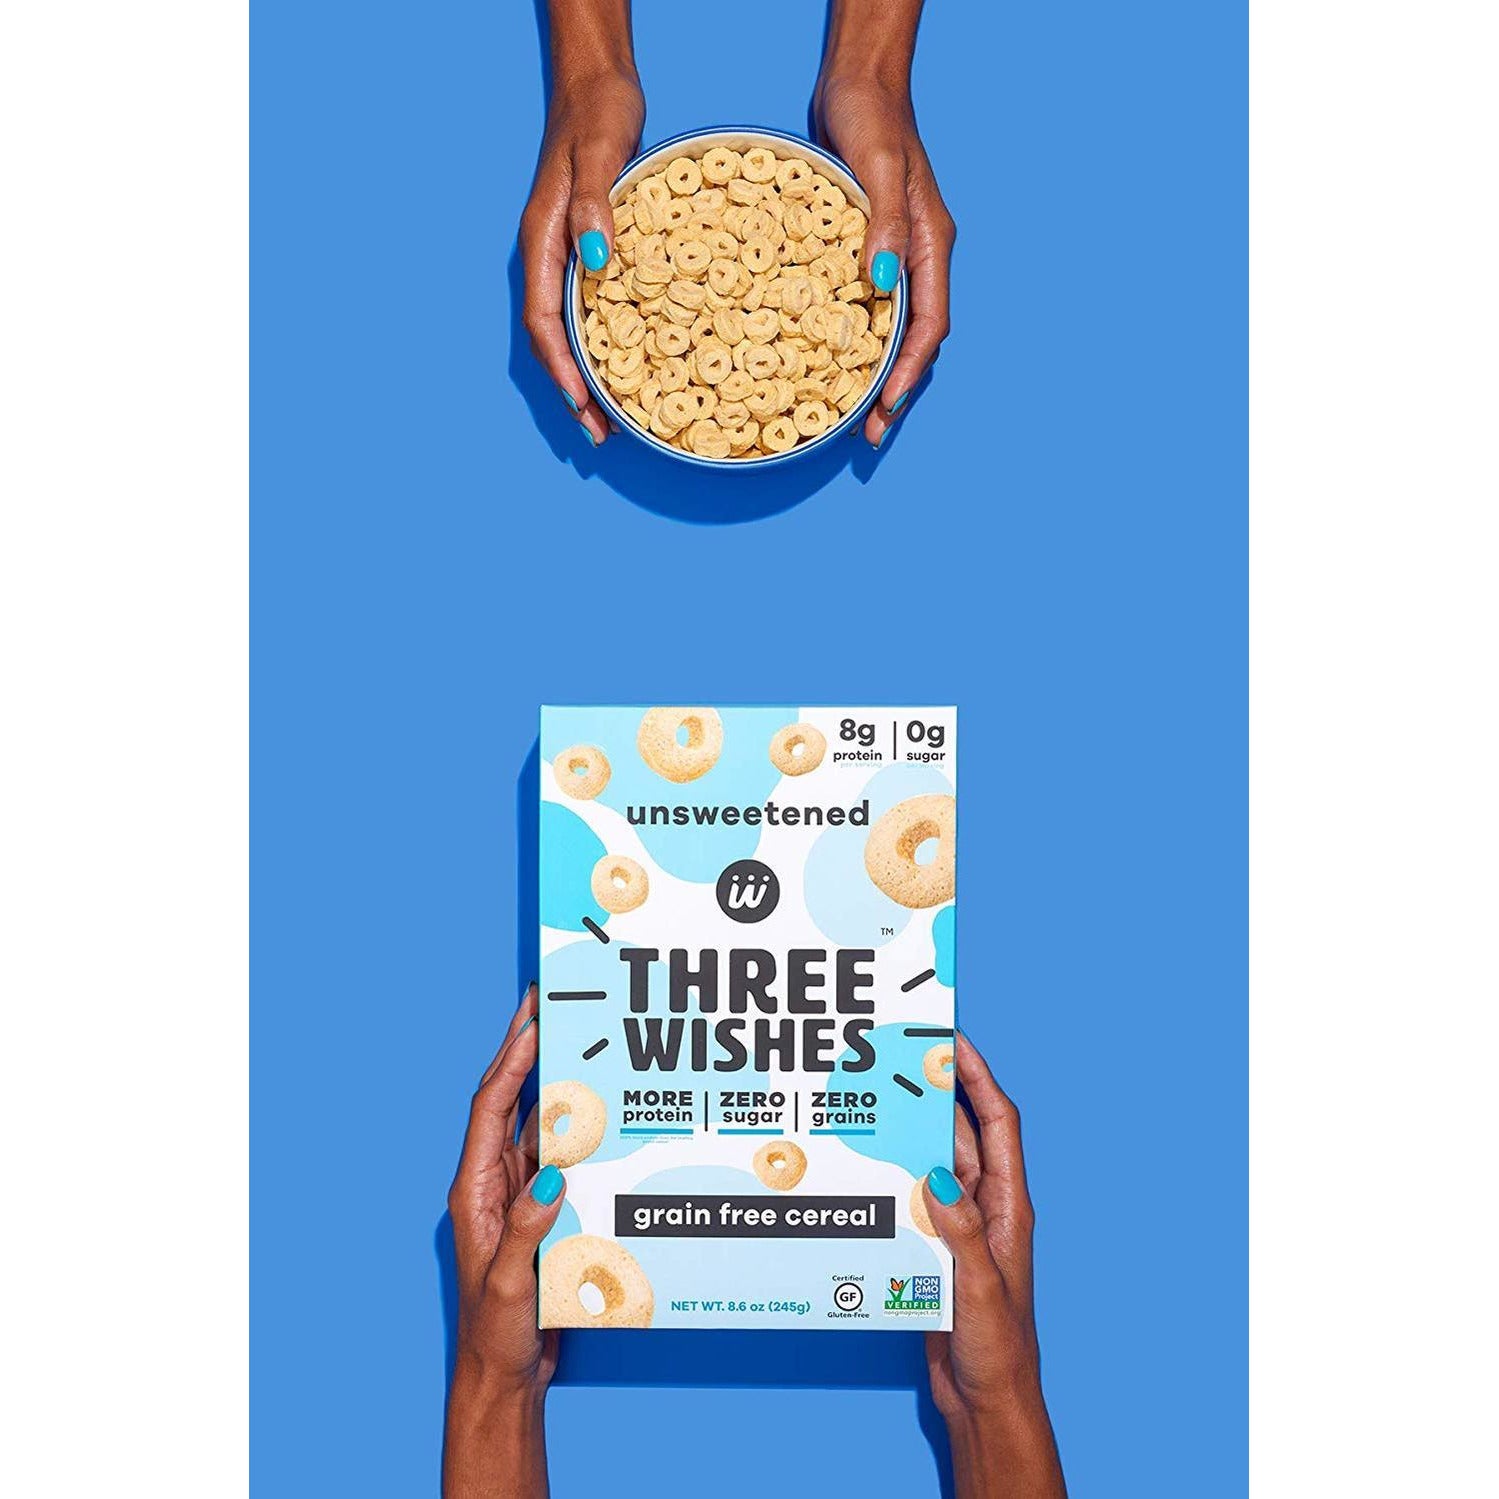 Three Wishes Grain Free Cereal by Three Wishes - Exclusive Offer at $7.99  on Netrition